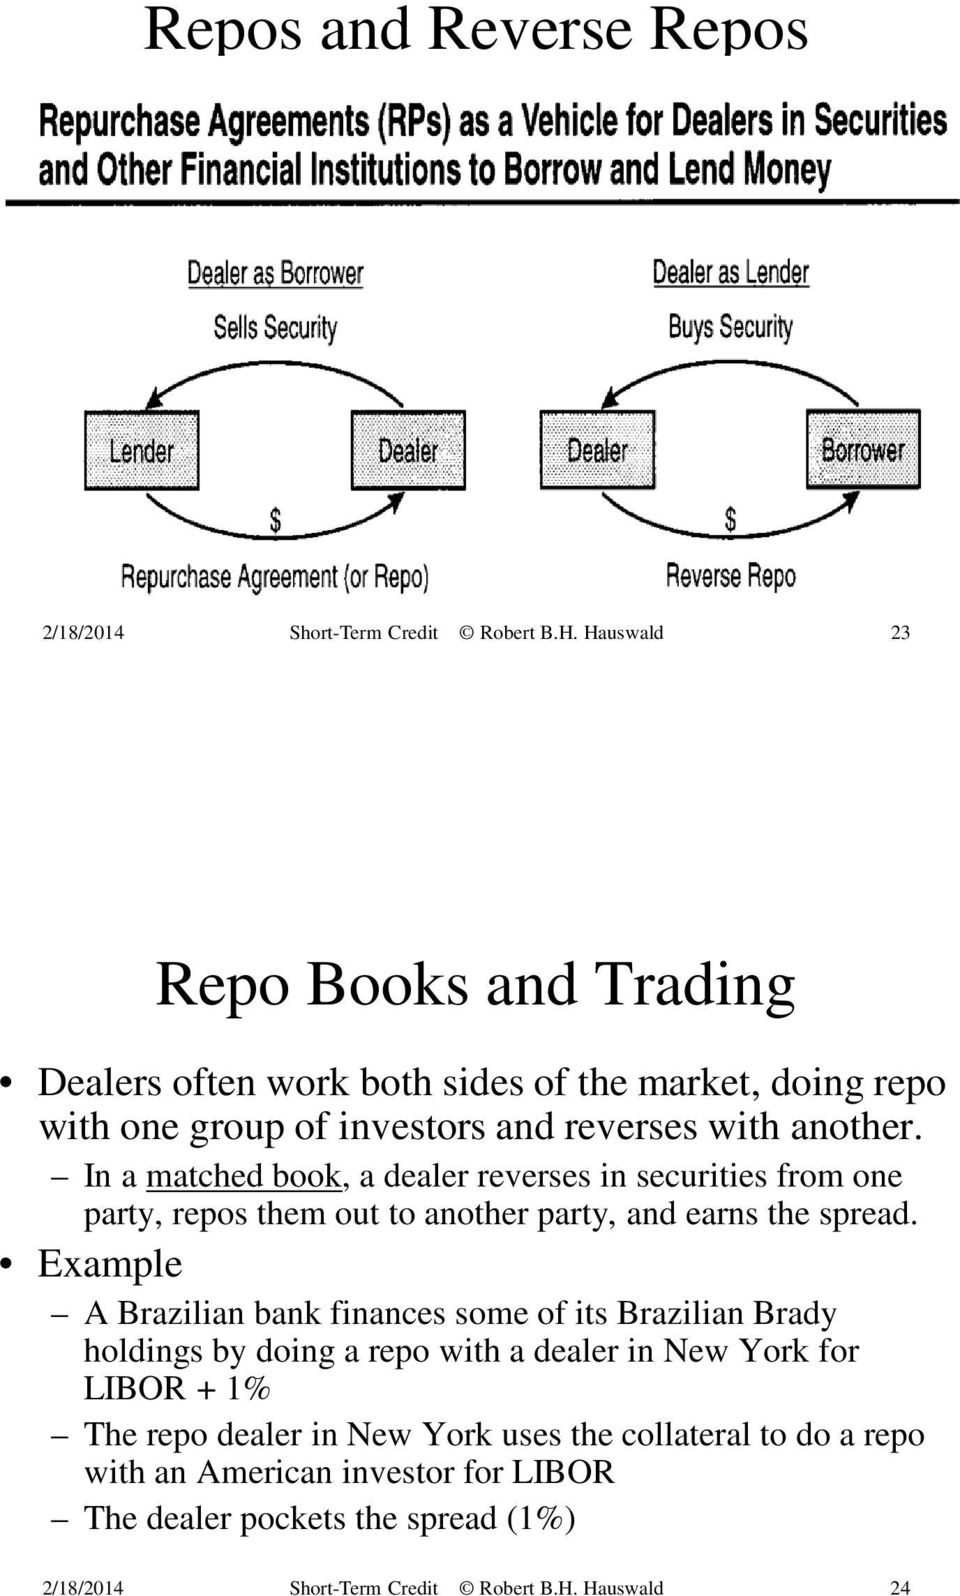 In a matched book, a dealer reverses in securities from one party, repos them out to another party, and earns the spread.